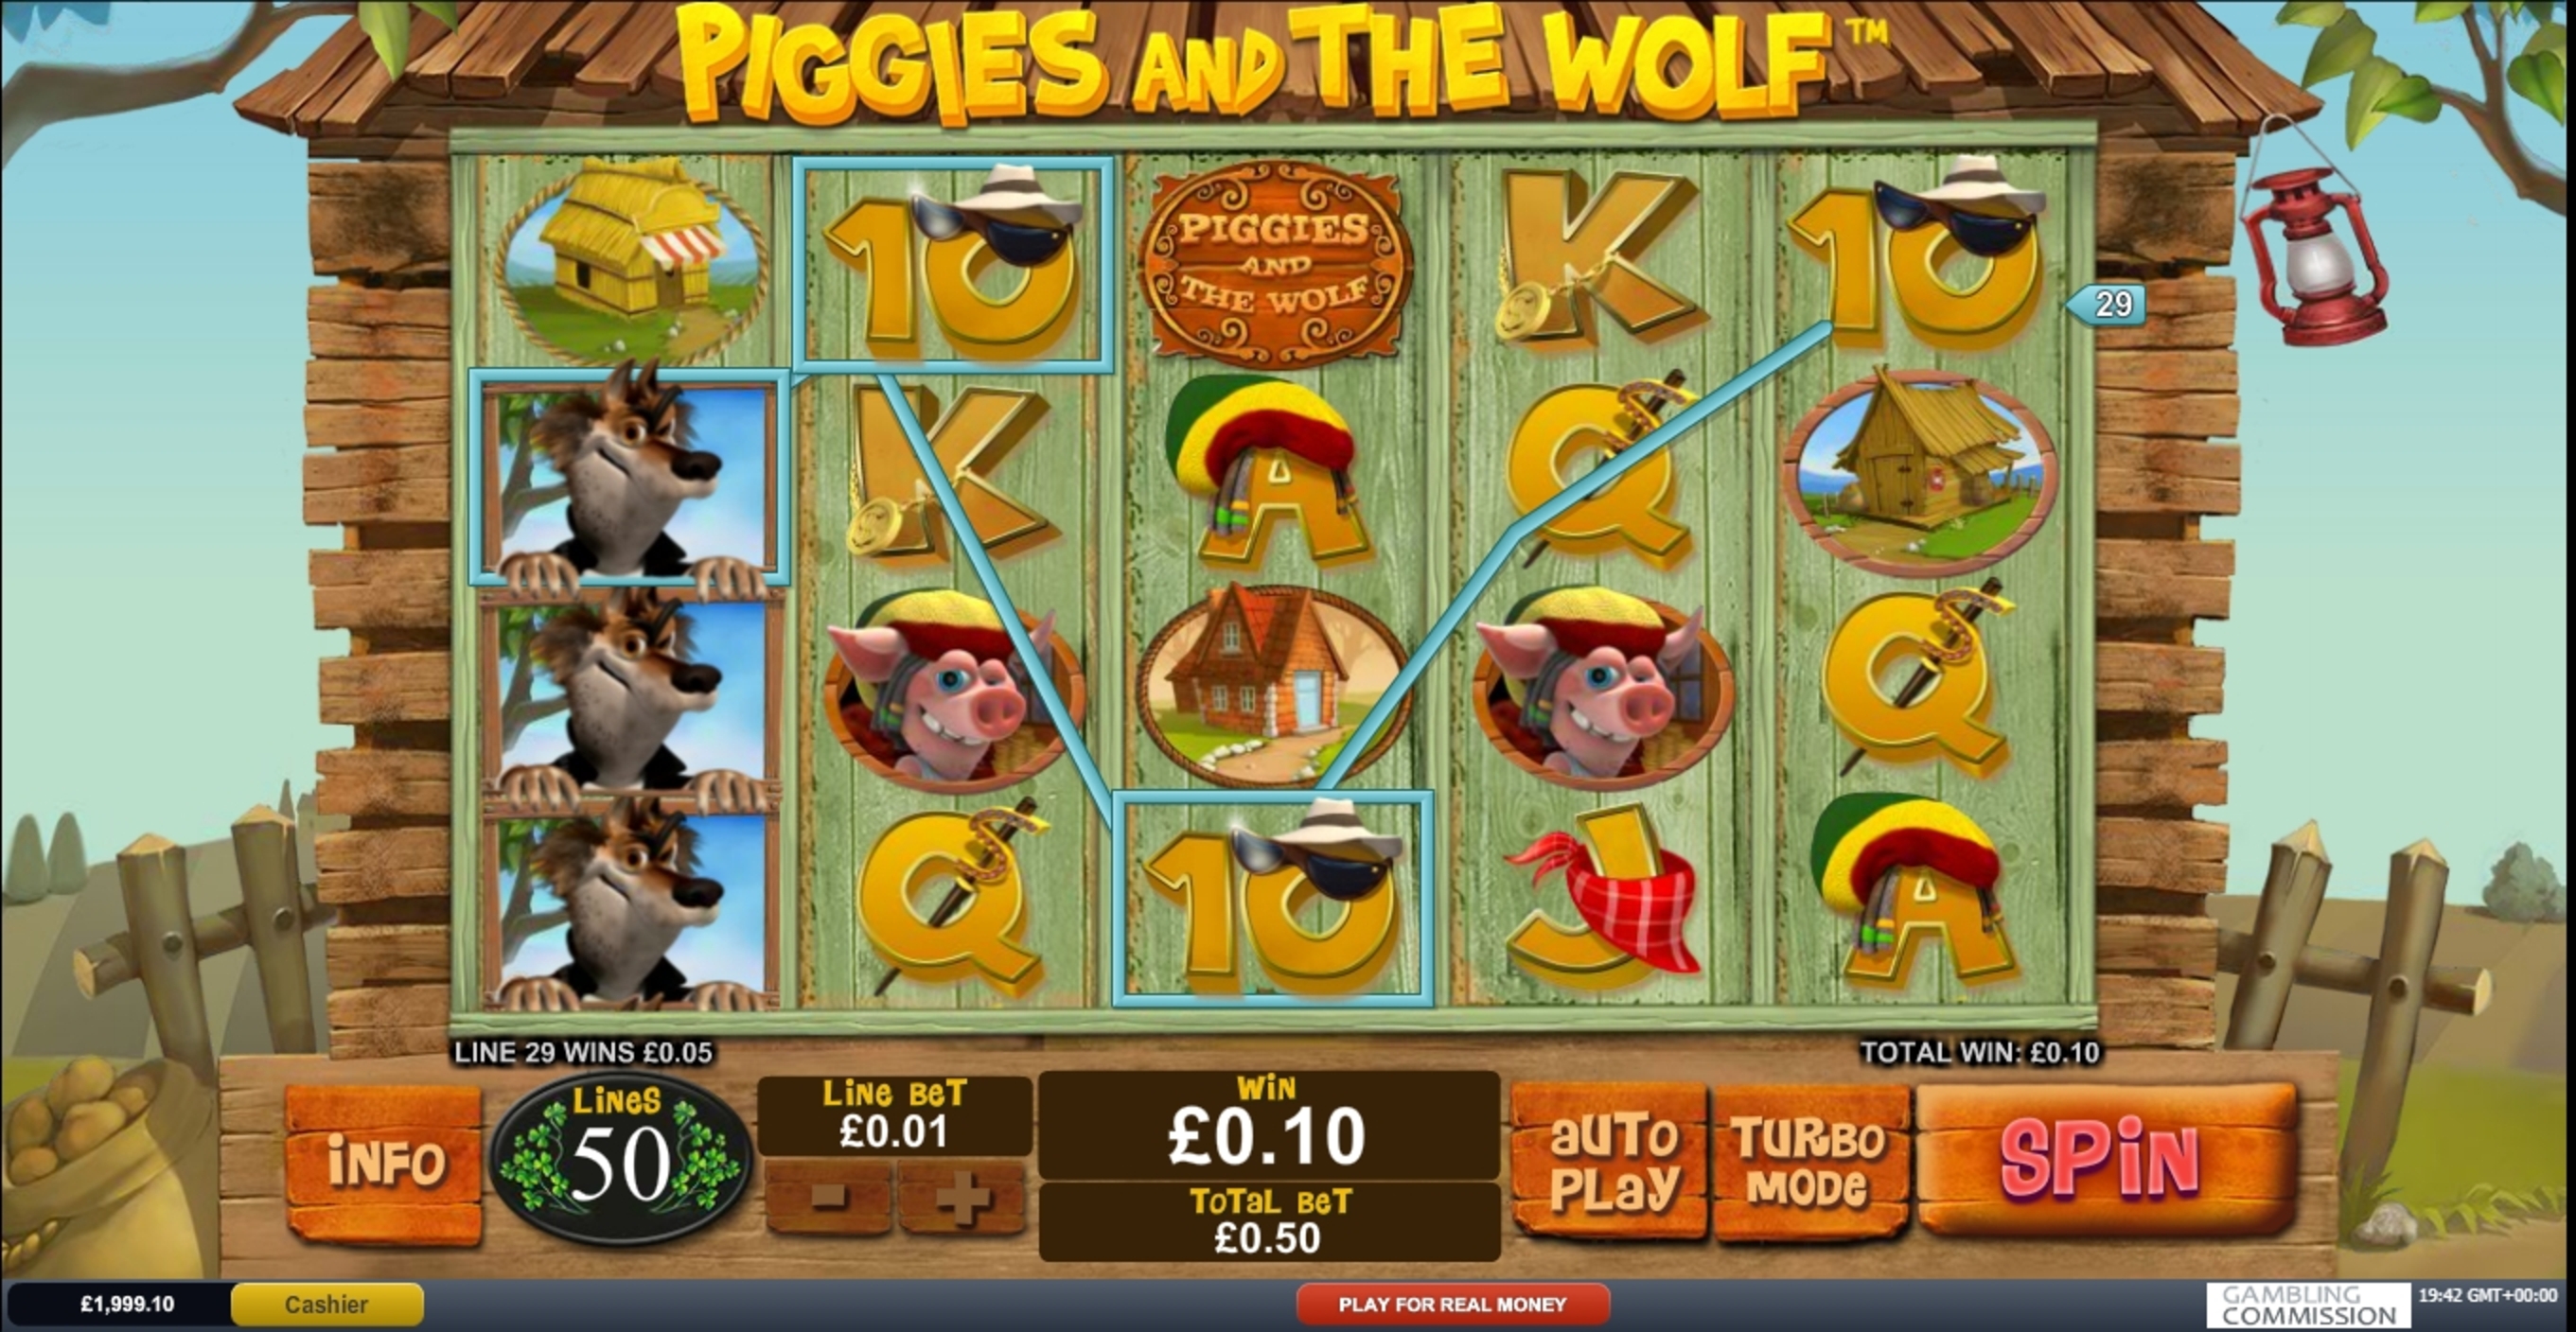 Win Money in Piggies and The Wolf Free Slot Game by Playtech